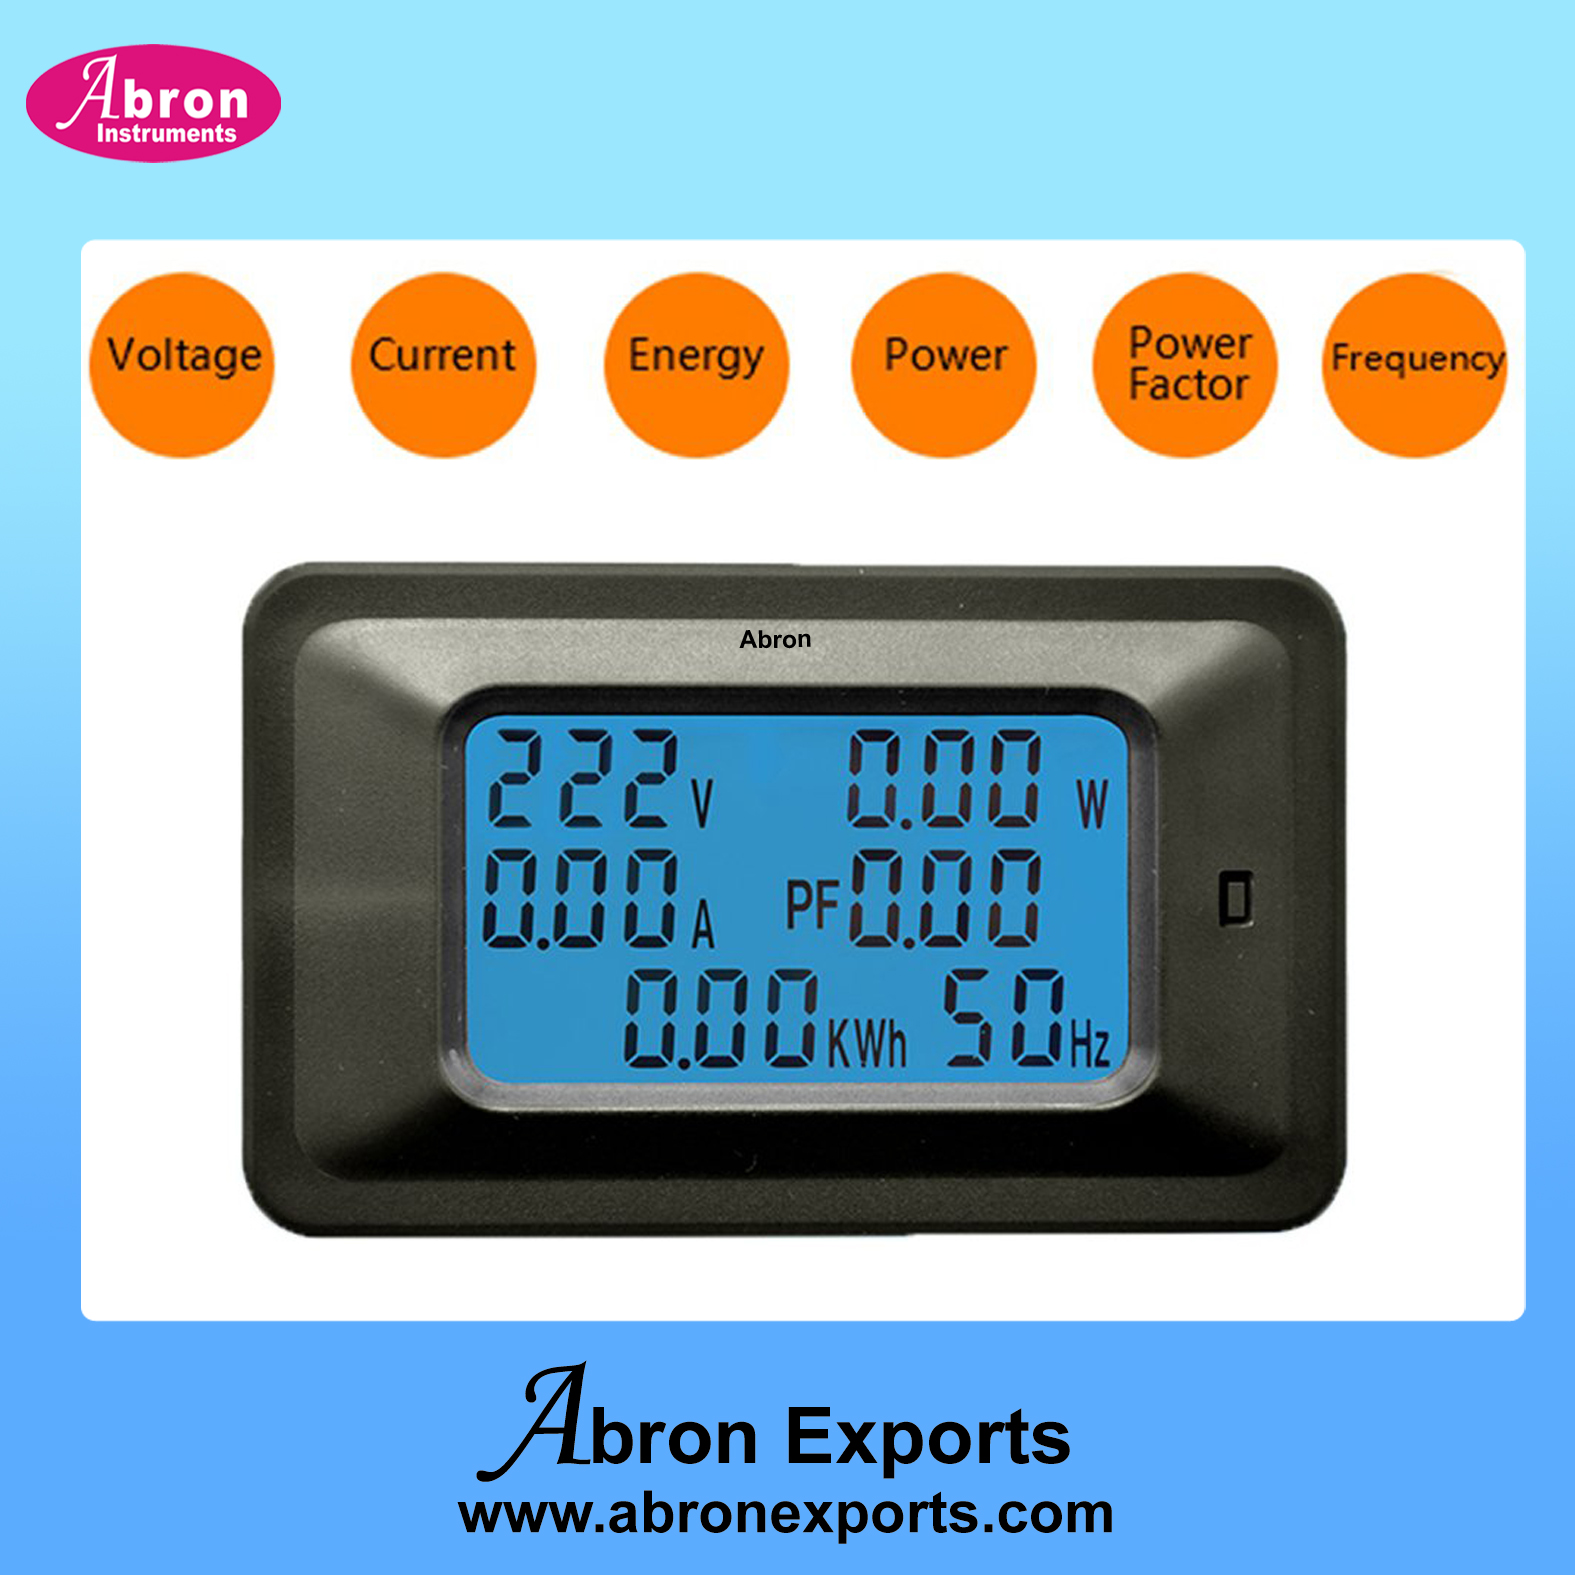 Energy Meter Power Factor Meter Single Phase Digital Volt, Current 0-20A, PF, Power Watts, Frequency Hz, Kwh AE-1433PF